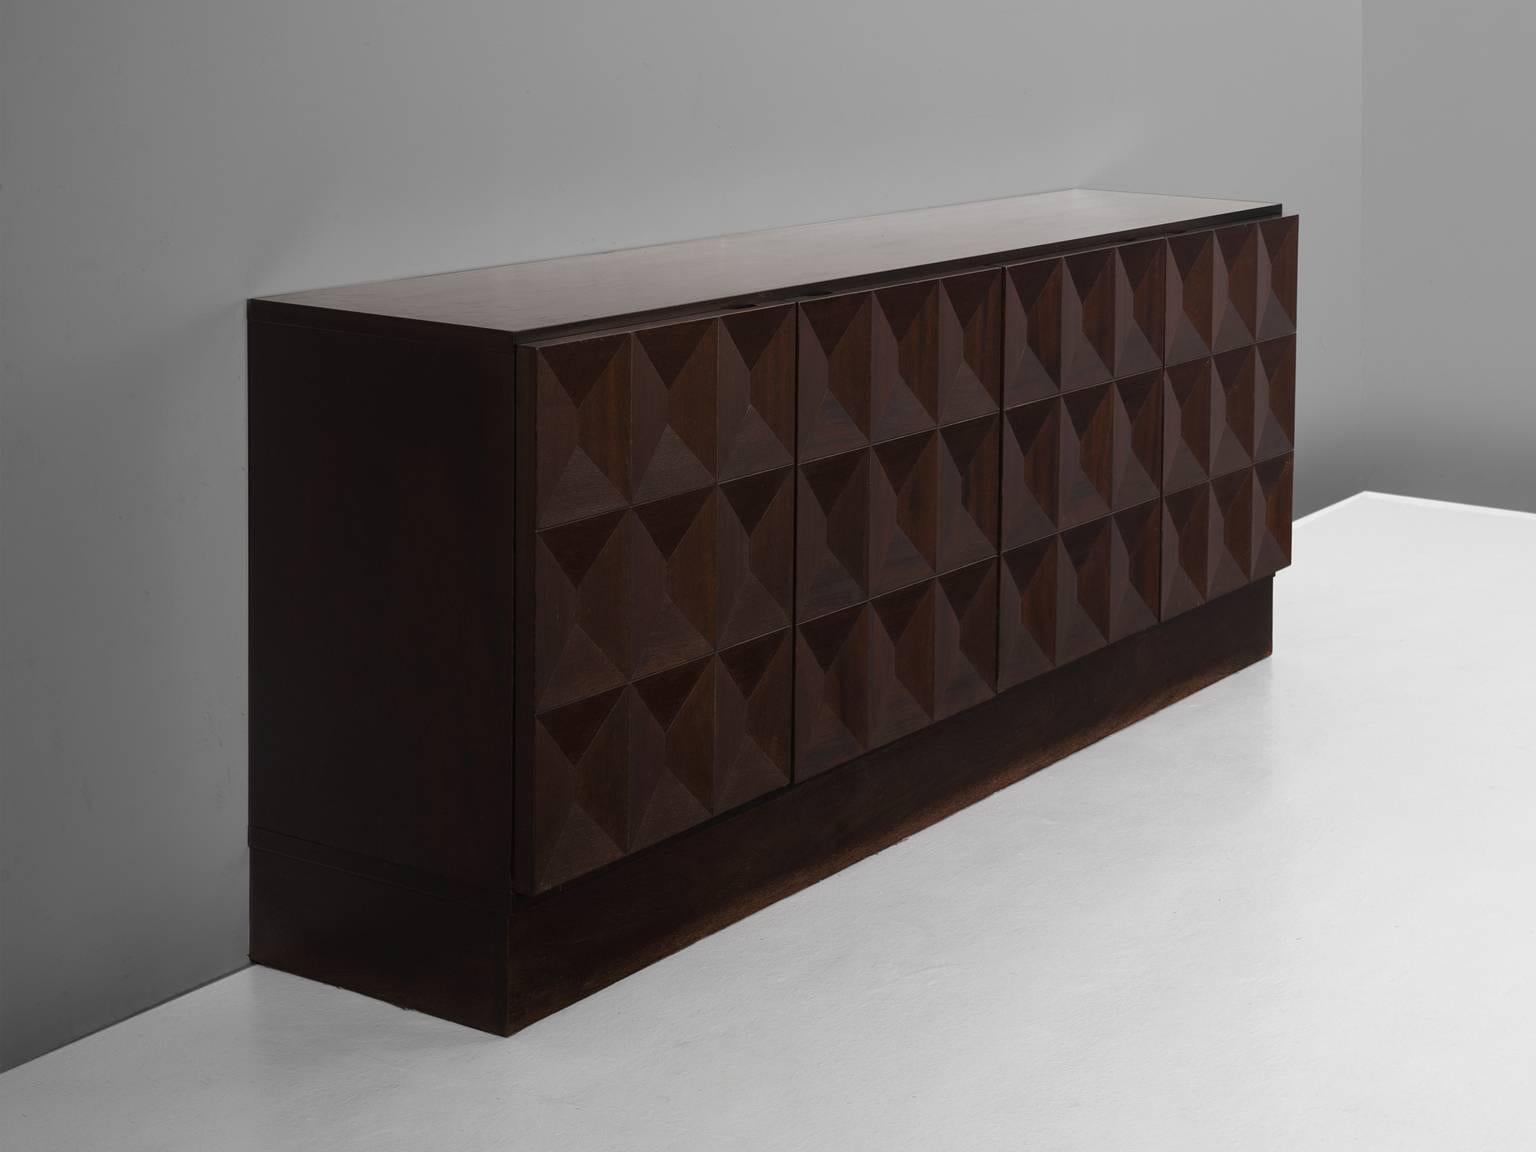 Sideboard, in oak, European, 1970s. 

Large Brutalist credenza in oak veneer with graphic designed door panels. Four doors, each with a three-dimensional pattern of squares. Each square has an inward pyramid figure, which gives this cabinet a very